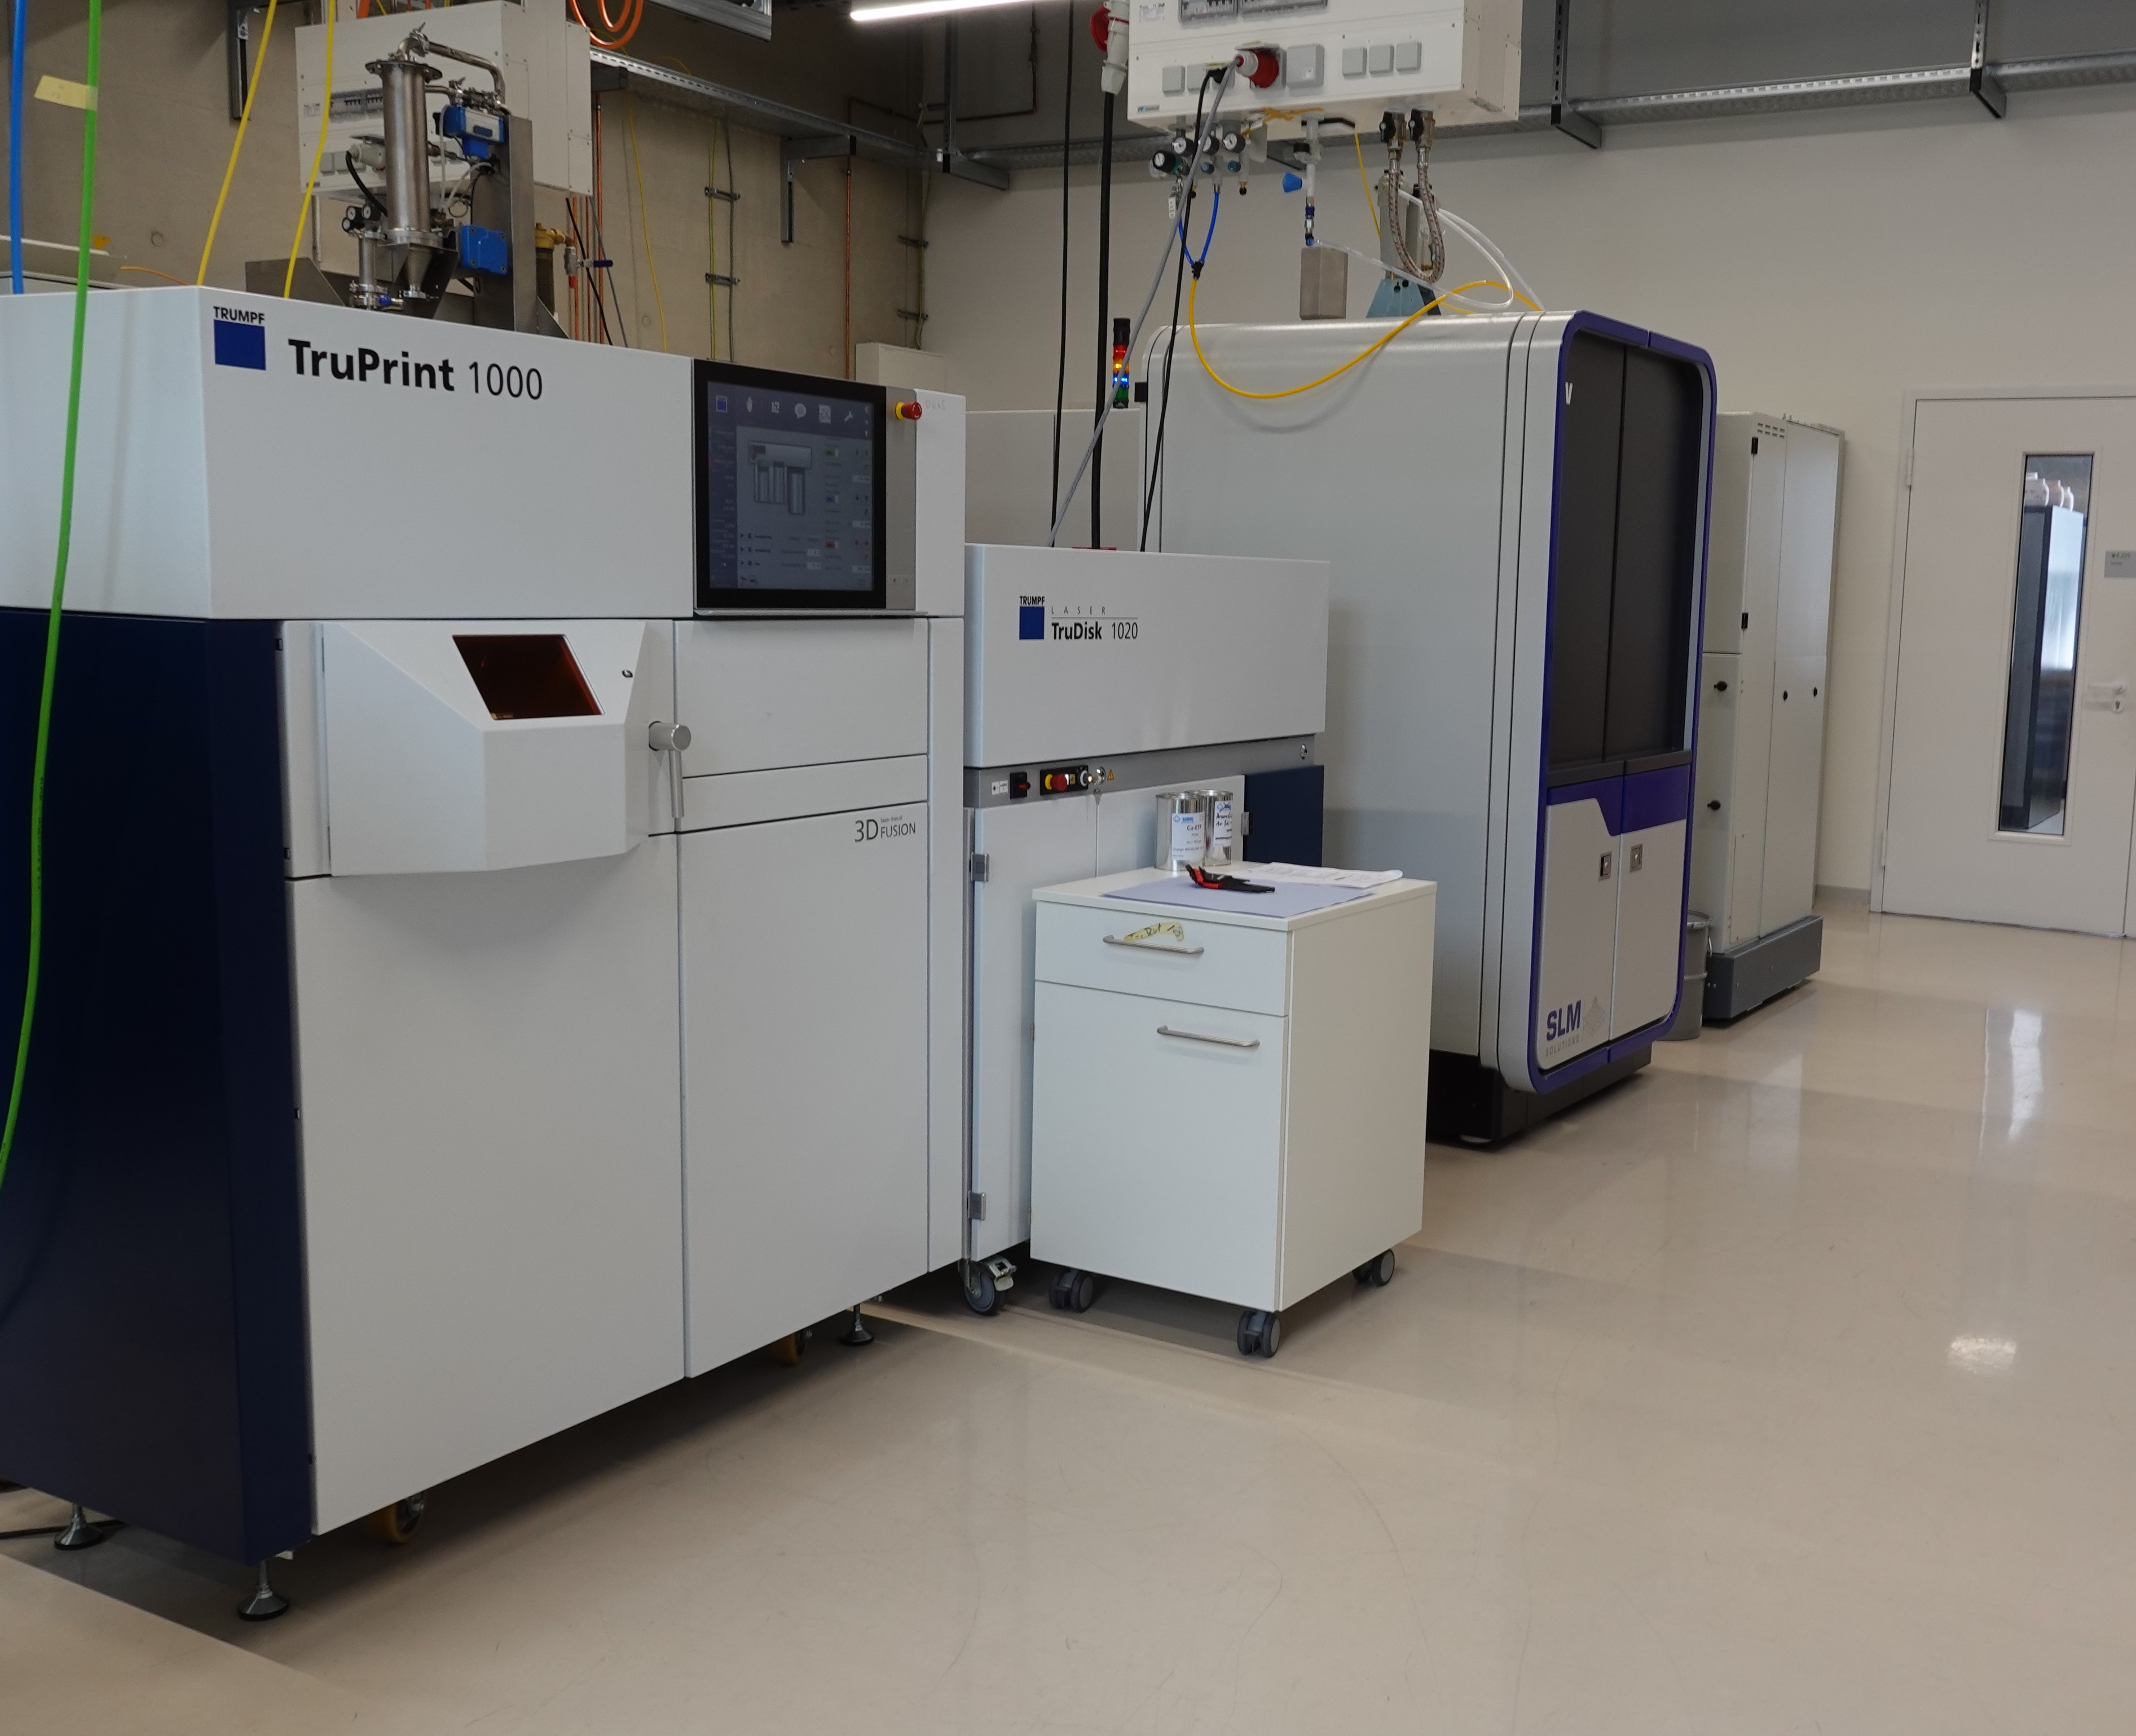 Insight into the Additive Manufacturing Laboratory (AMLab)